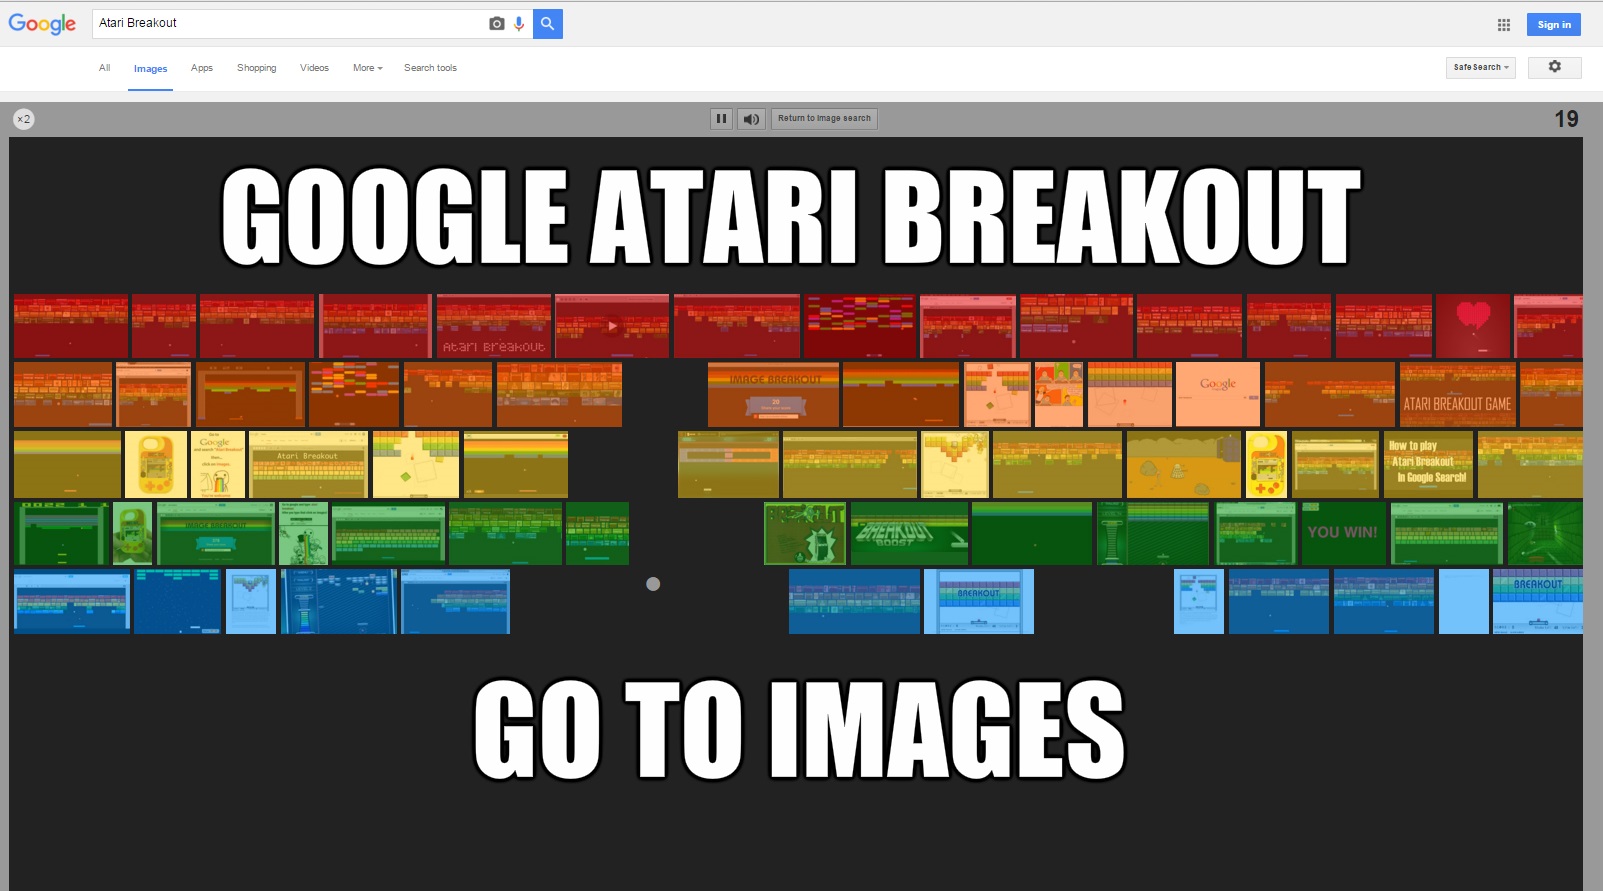 denis simachev - Google Atari Breakout Sign in Sign in All Images Apps Shopping Videos More Search tools Safe Search 110 Return to Image search 19 Google Atari Breakout Atari Breakout Imbige Reckout Google Atari Breakout Game How to play Atari Breakout In